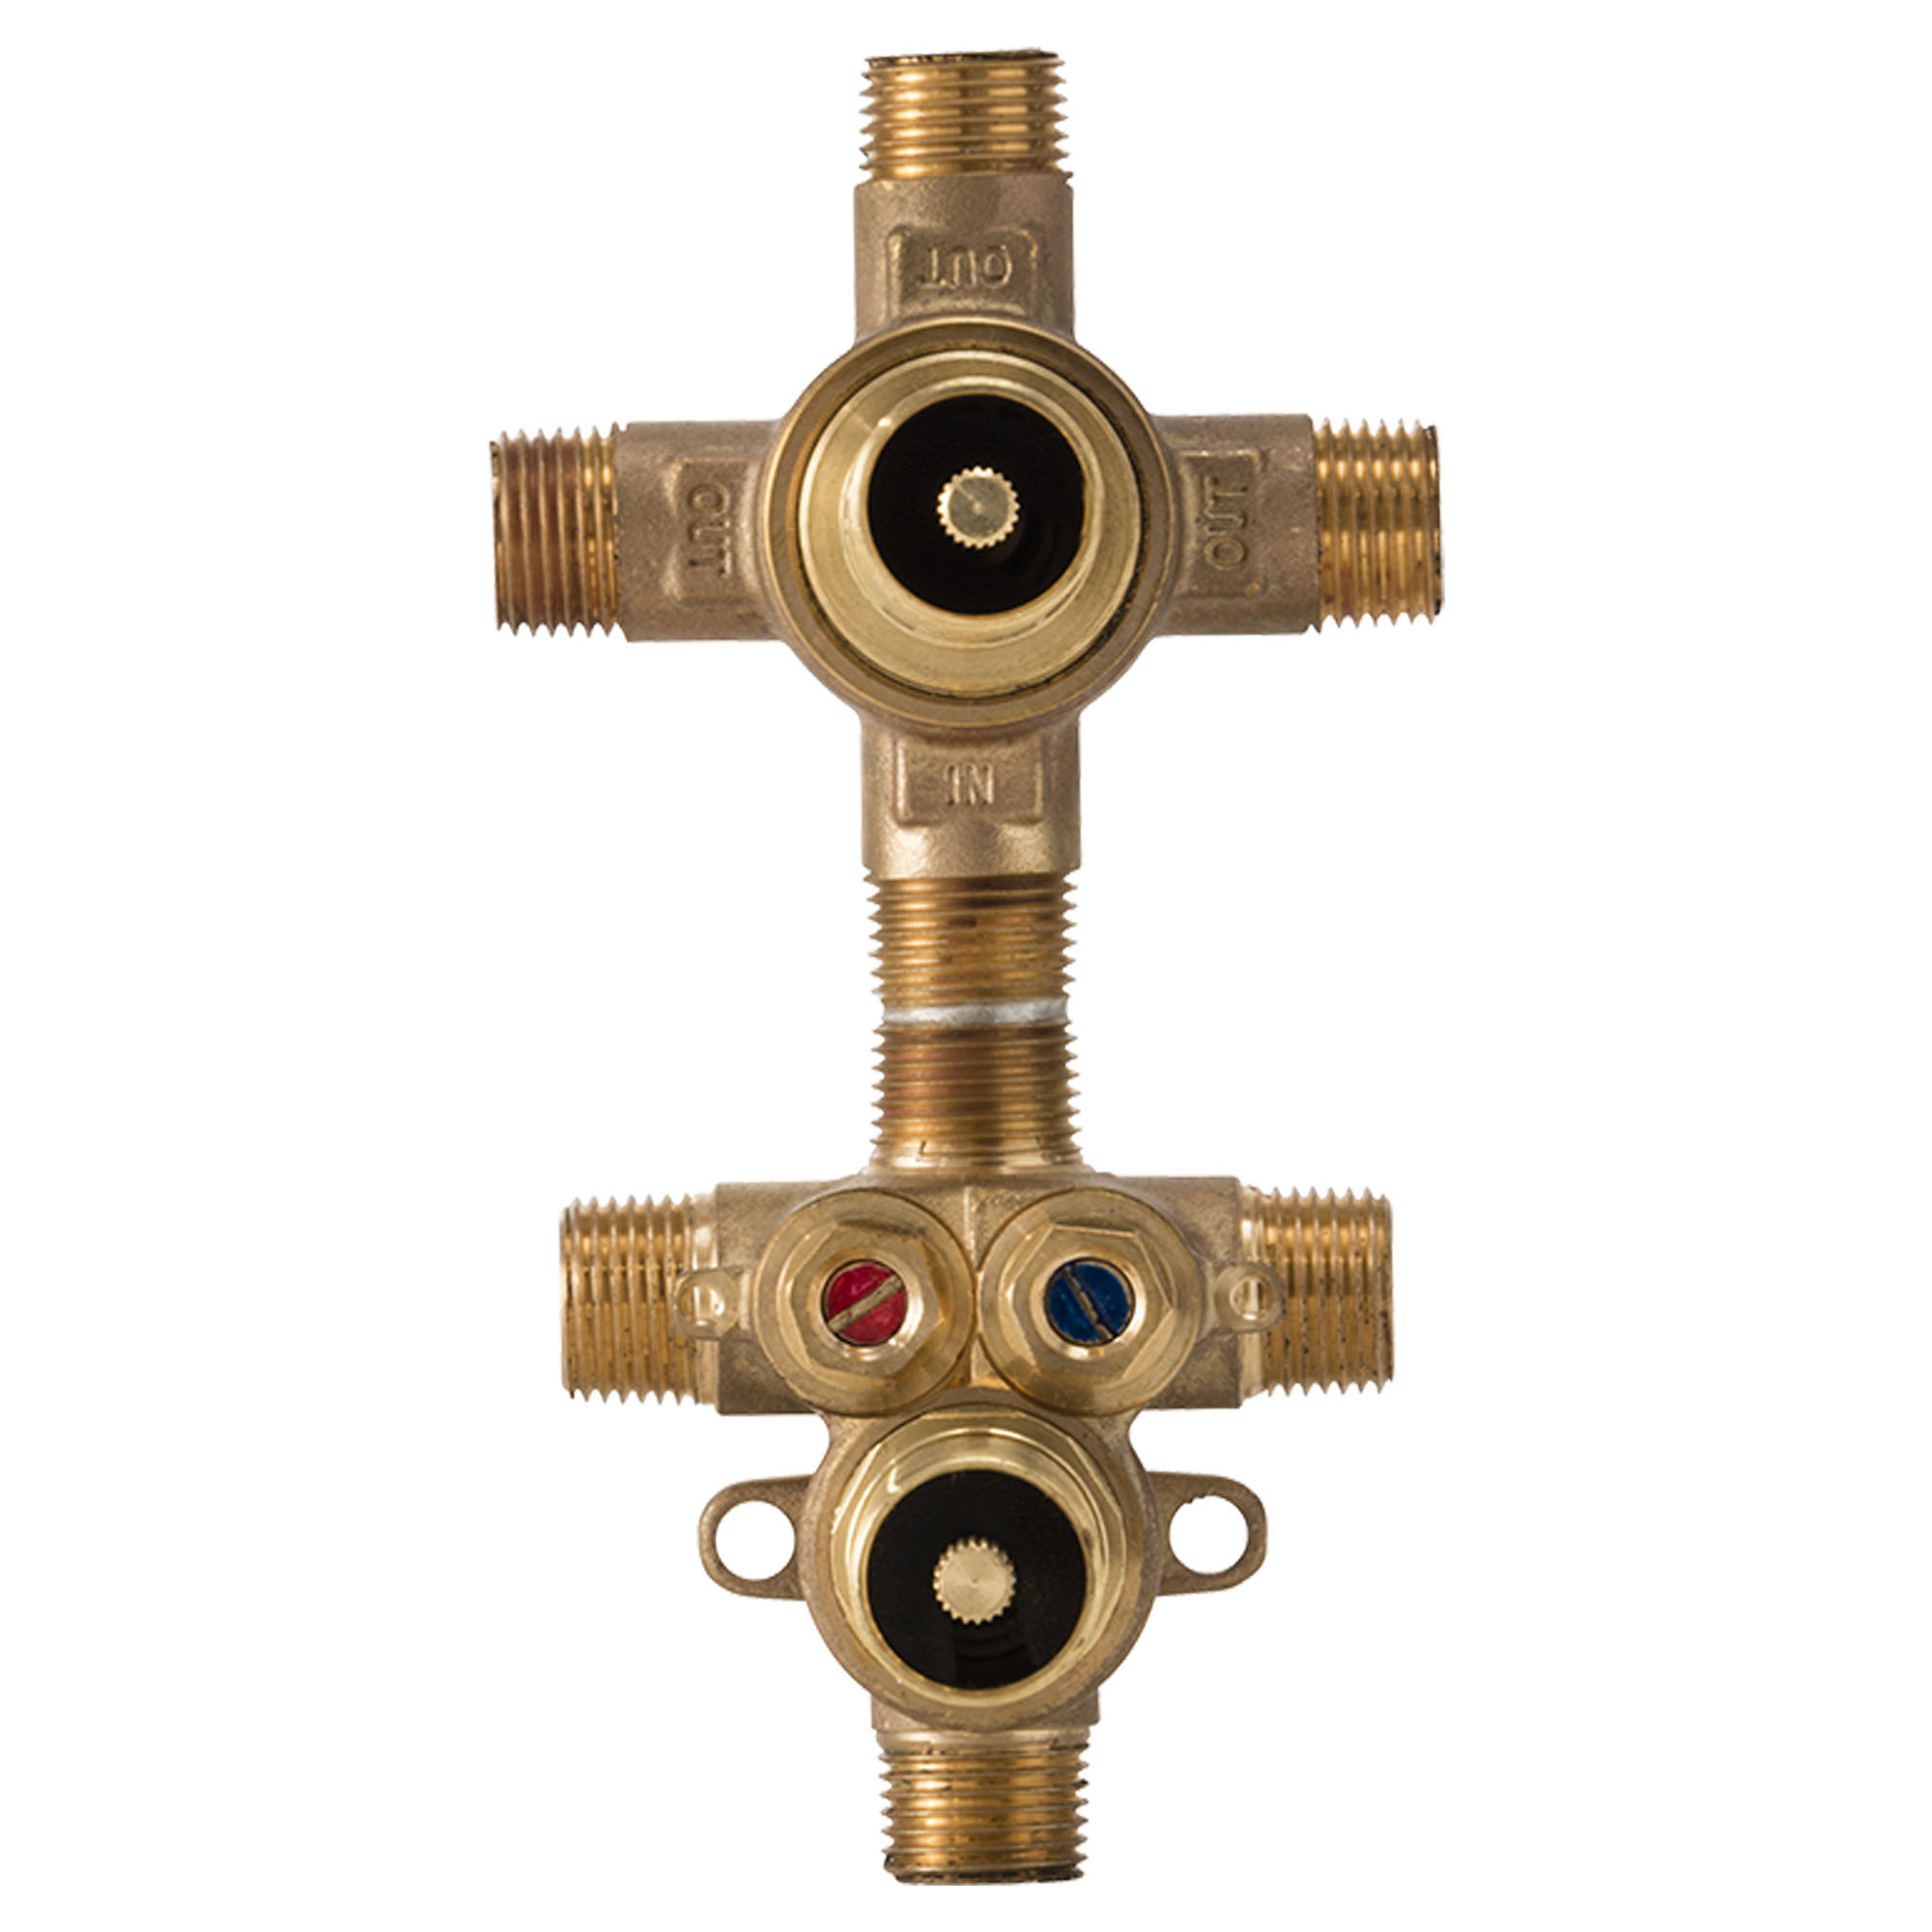 2-Handle Thermostatic Rough Valve with 3-Way Diverter Non-Shared Functions